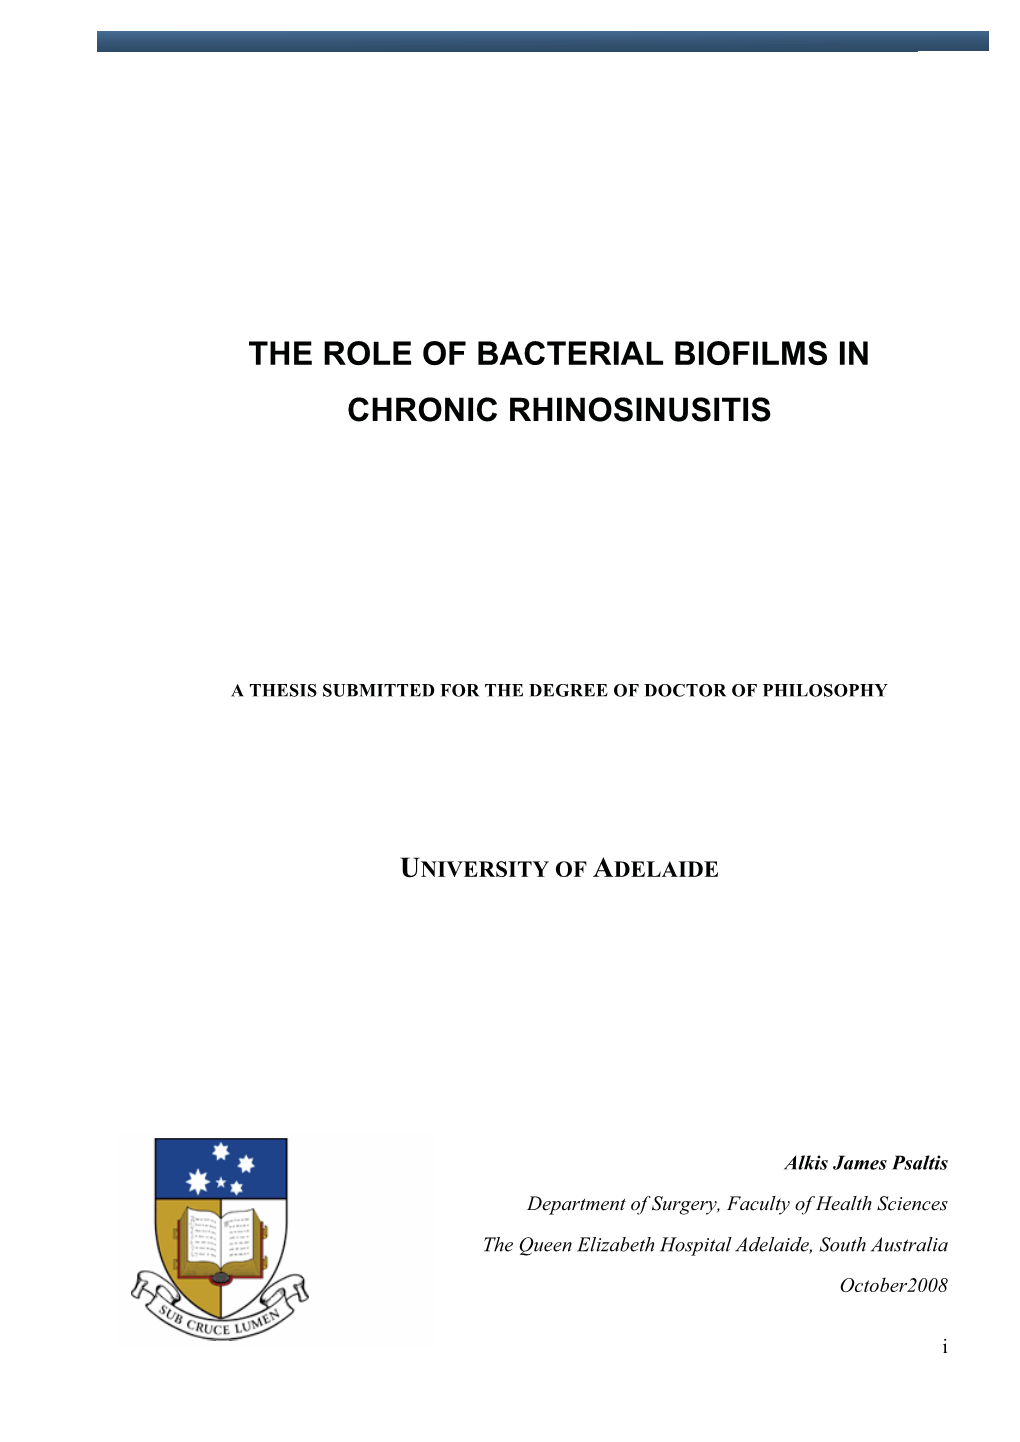 The Role of Bacterial Biofilms in Chronic Rhinosinusitis